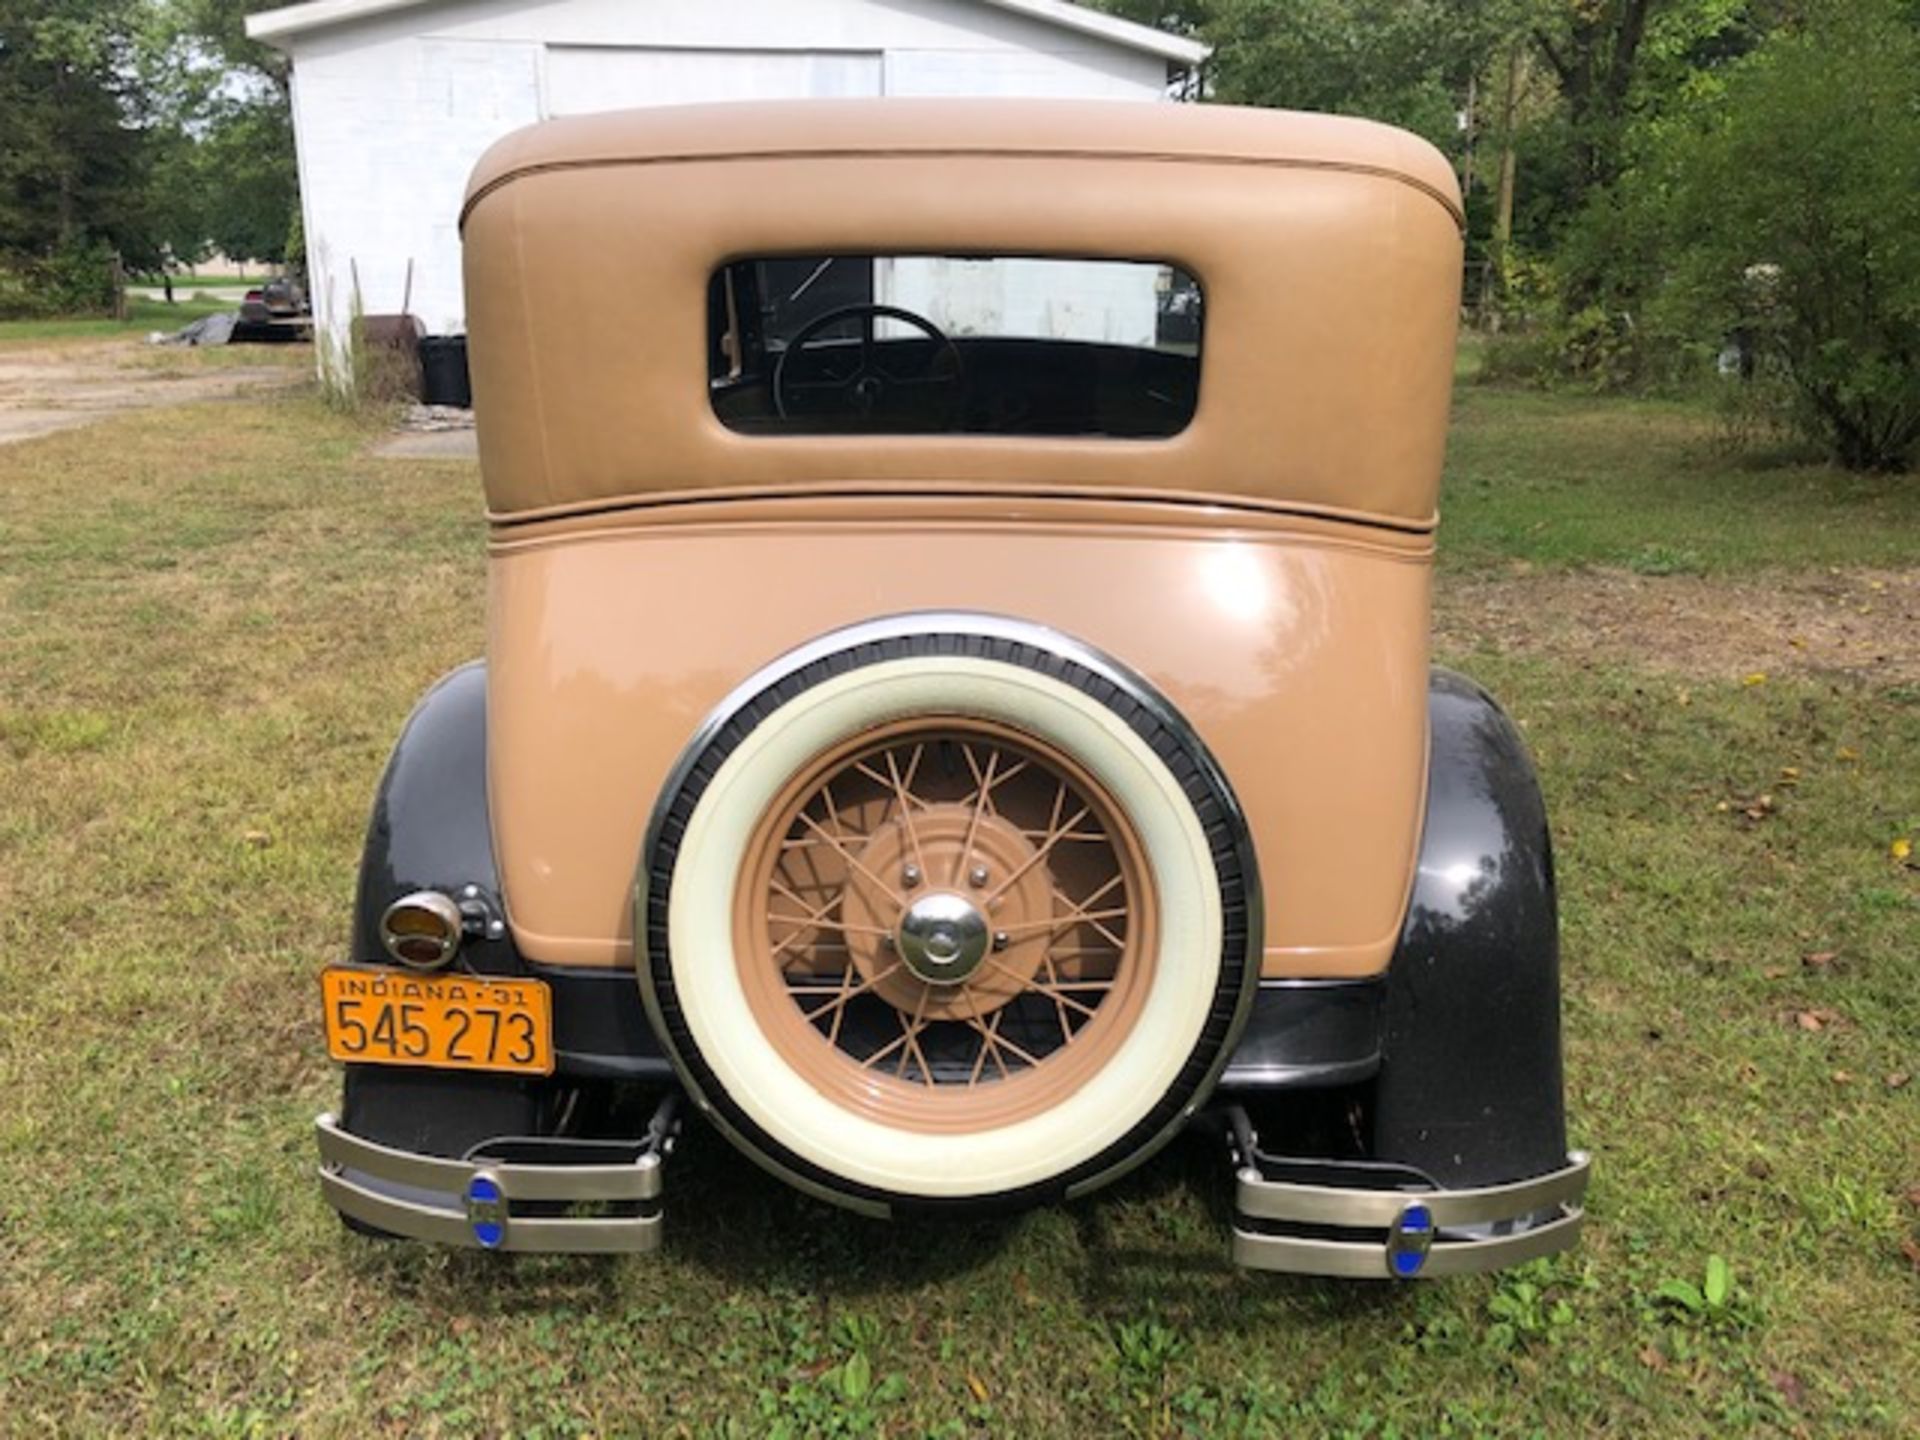 1931 Ford model A Leatherback Victoria, full restoration, cream/brown color with black running - Image 4 of 8